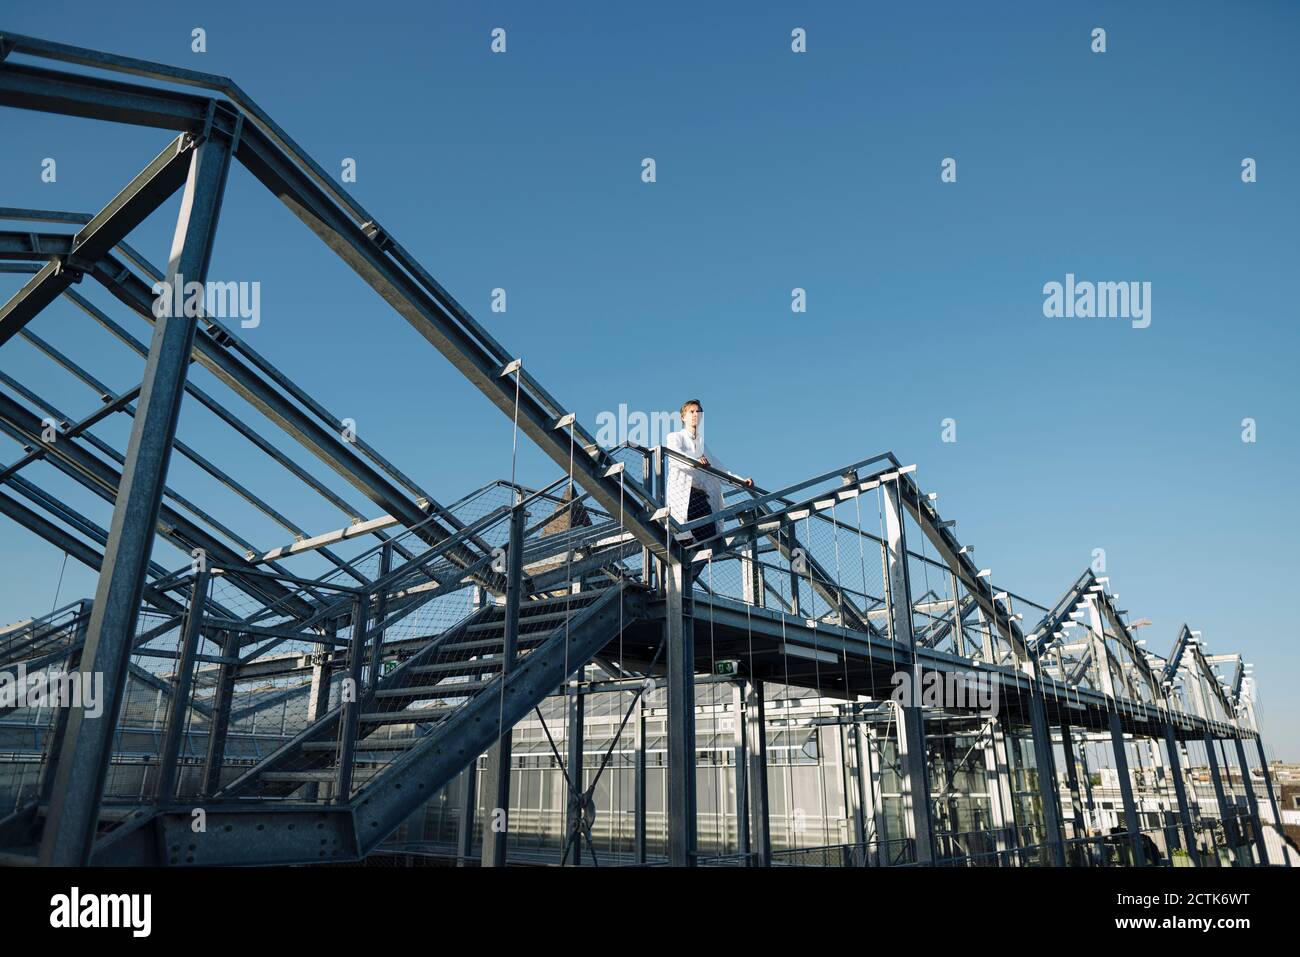 Scientist on a metal construction under blue sky Stock Photo